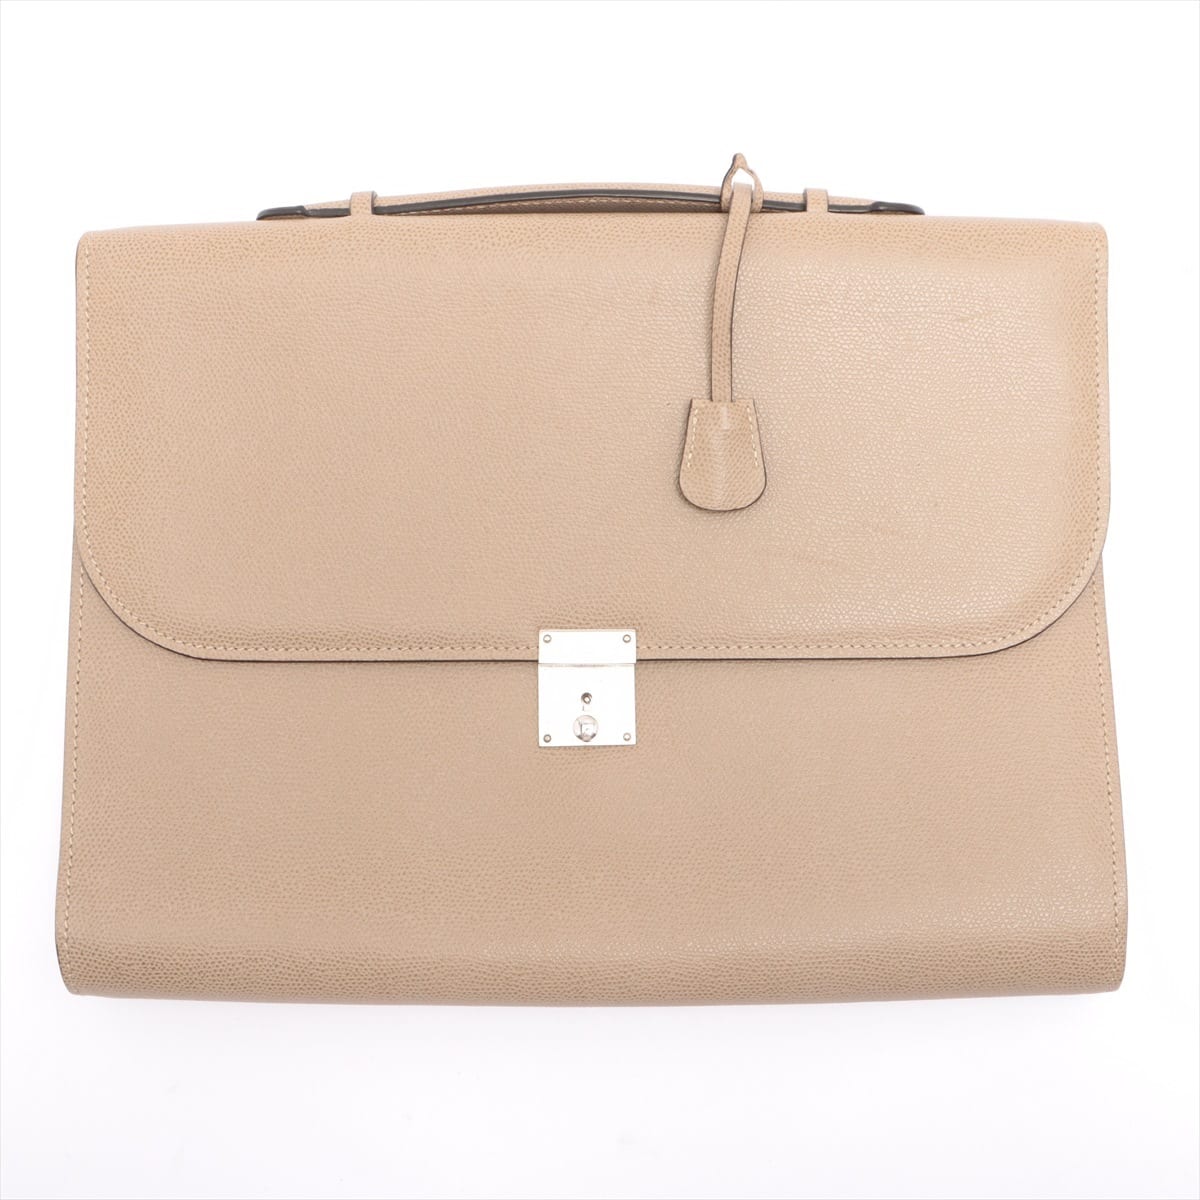 Valextra Leather Briefcase Beige The edge is slightly solid